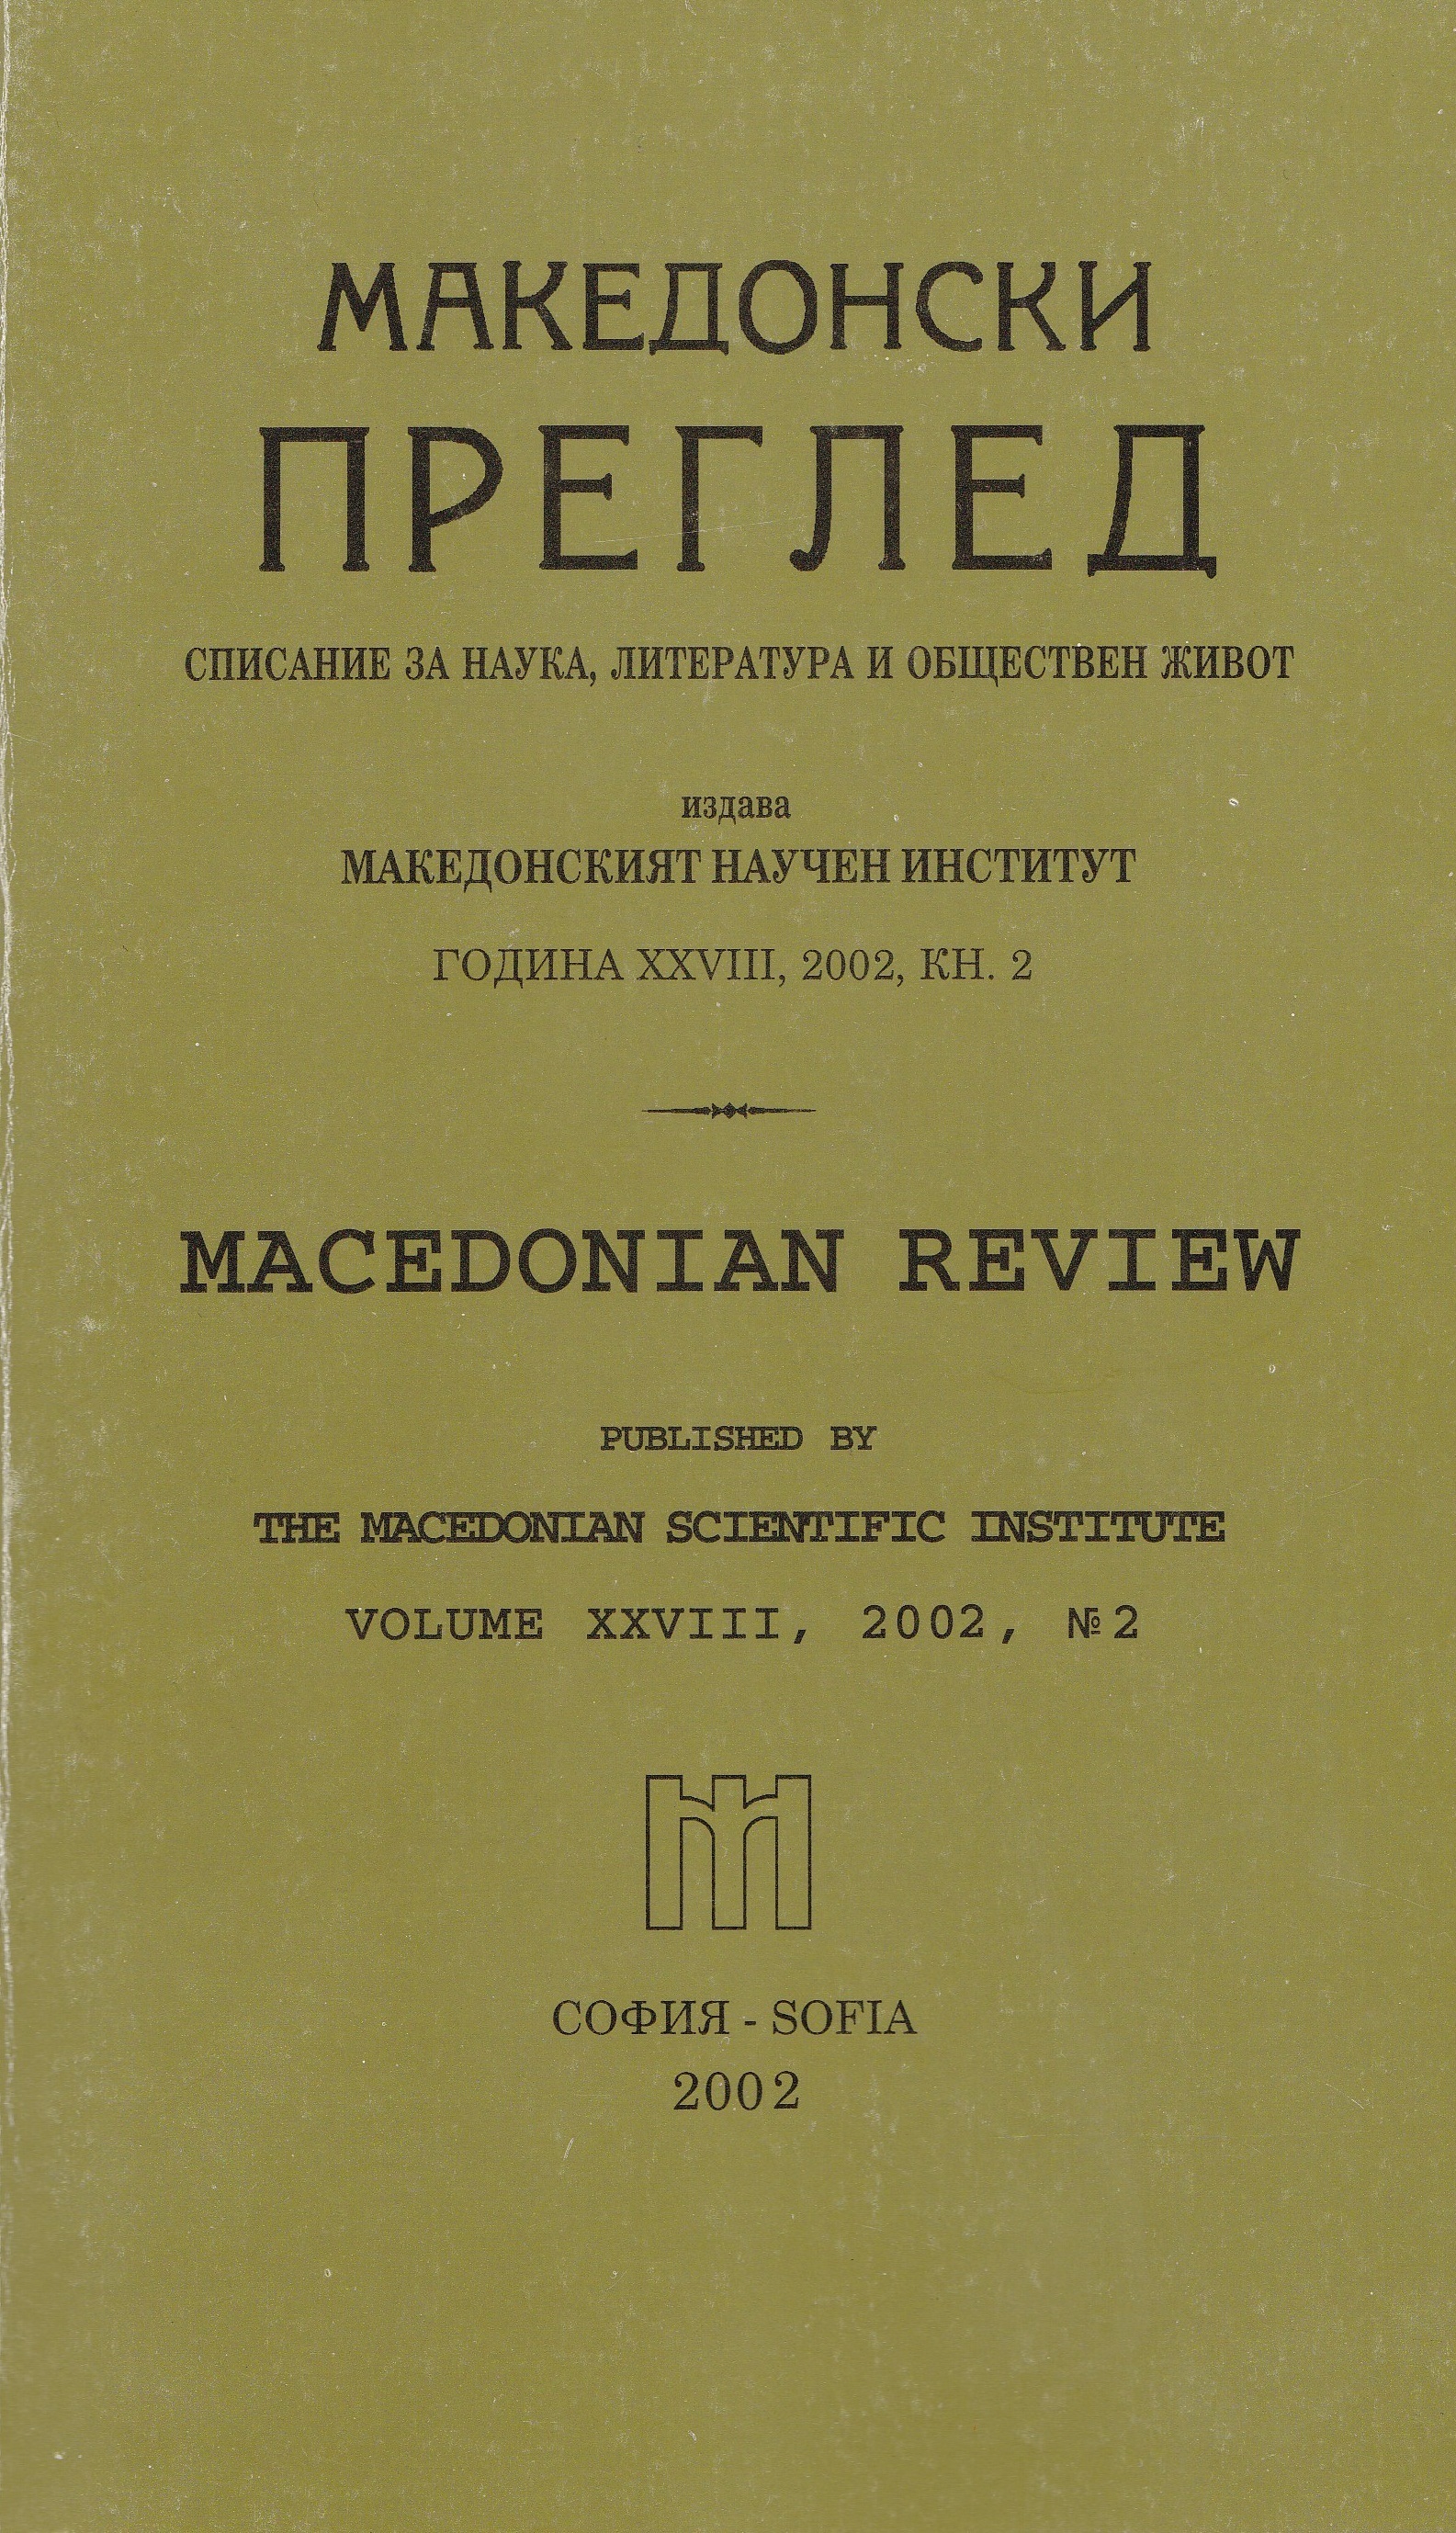 The Macedonian Literary Circle in Sofia (1938 — 1941)
Part II: A Return to the Old Native Roots Cover Image